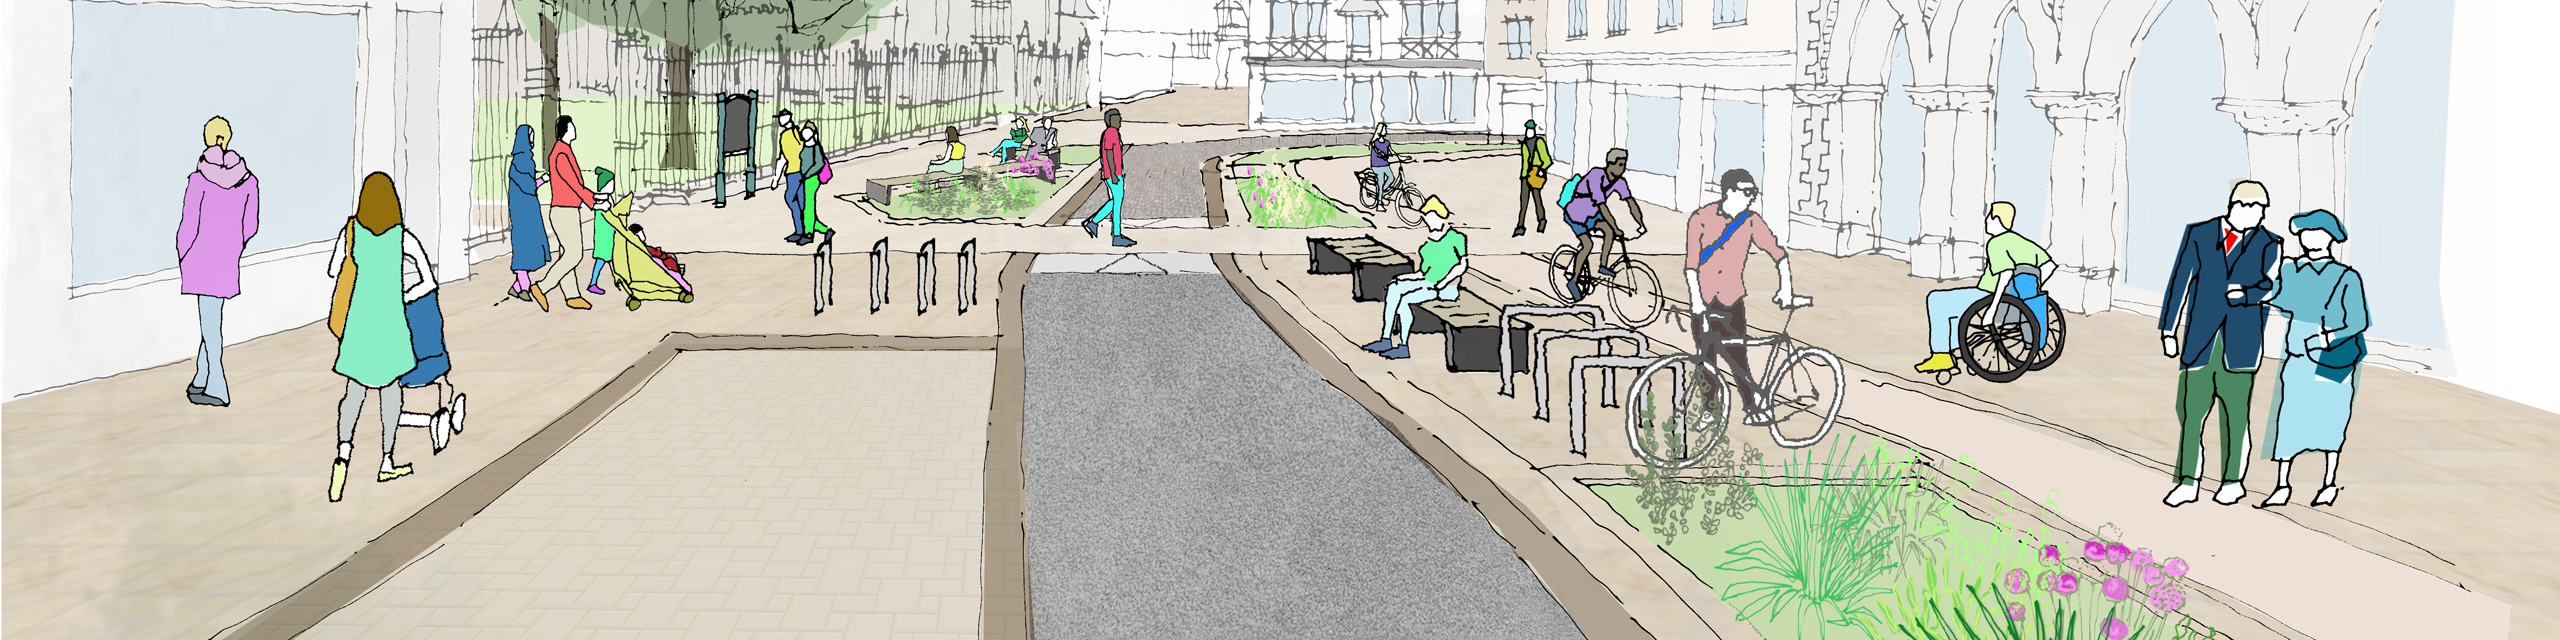 Artist's impression of streetscene in Broad Street Hereford after improvements